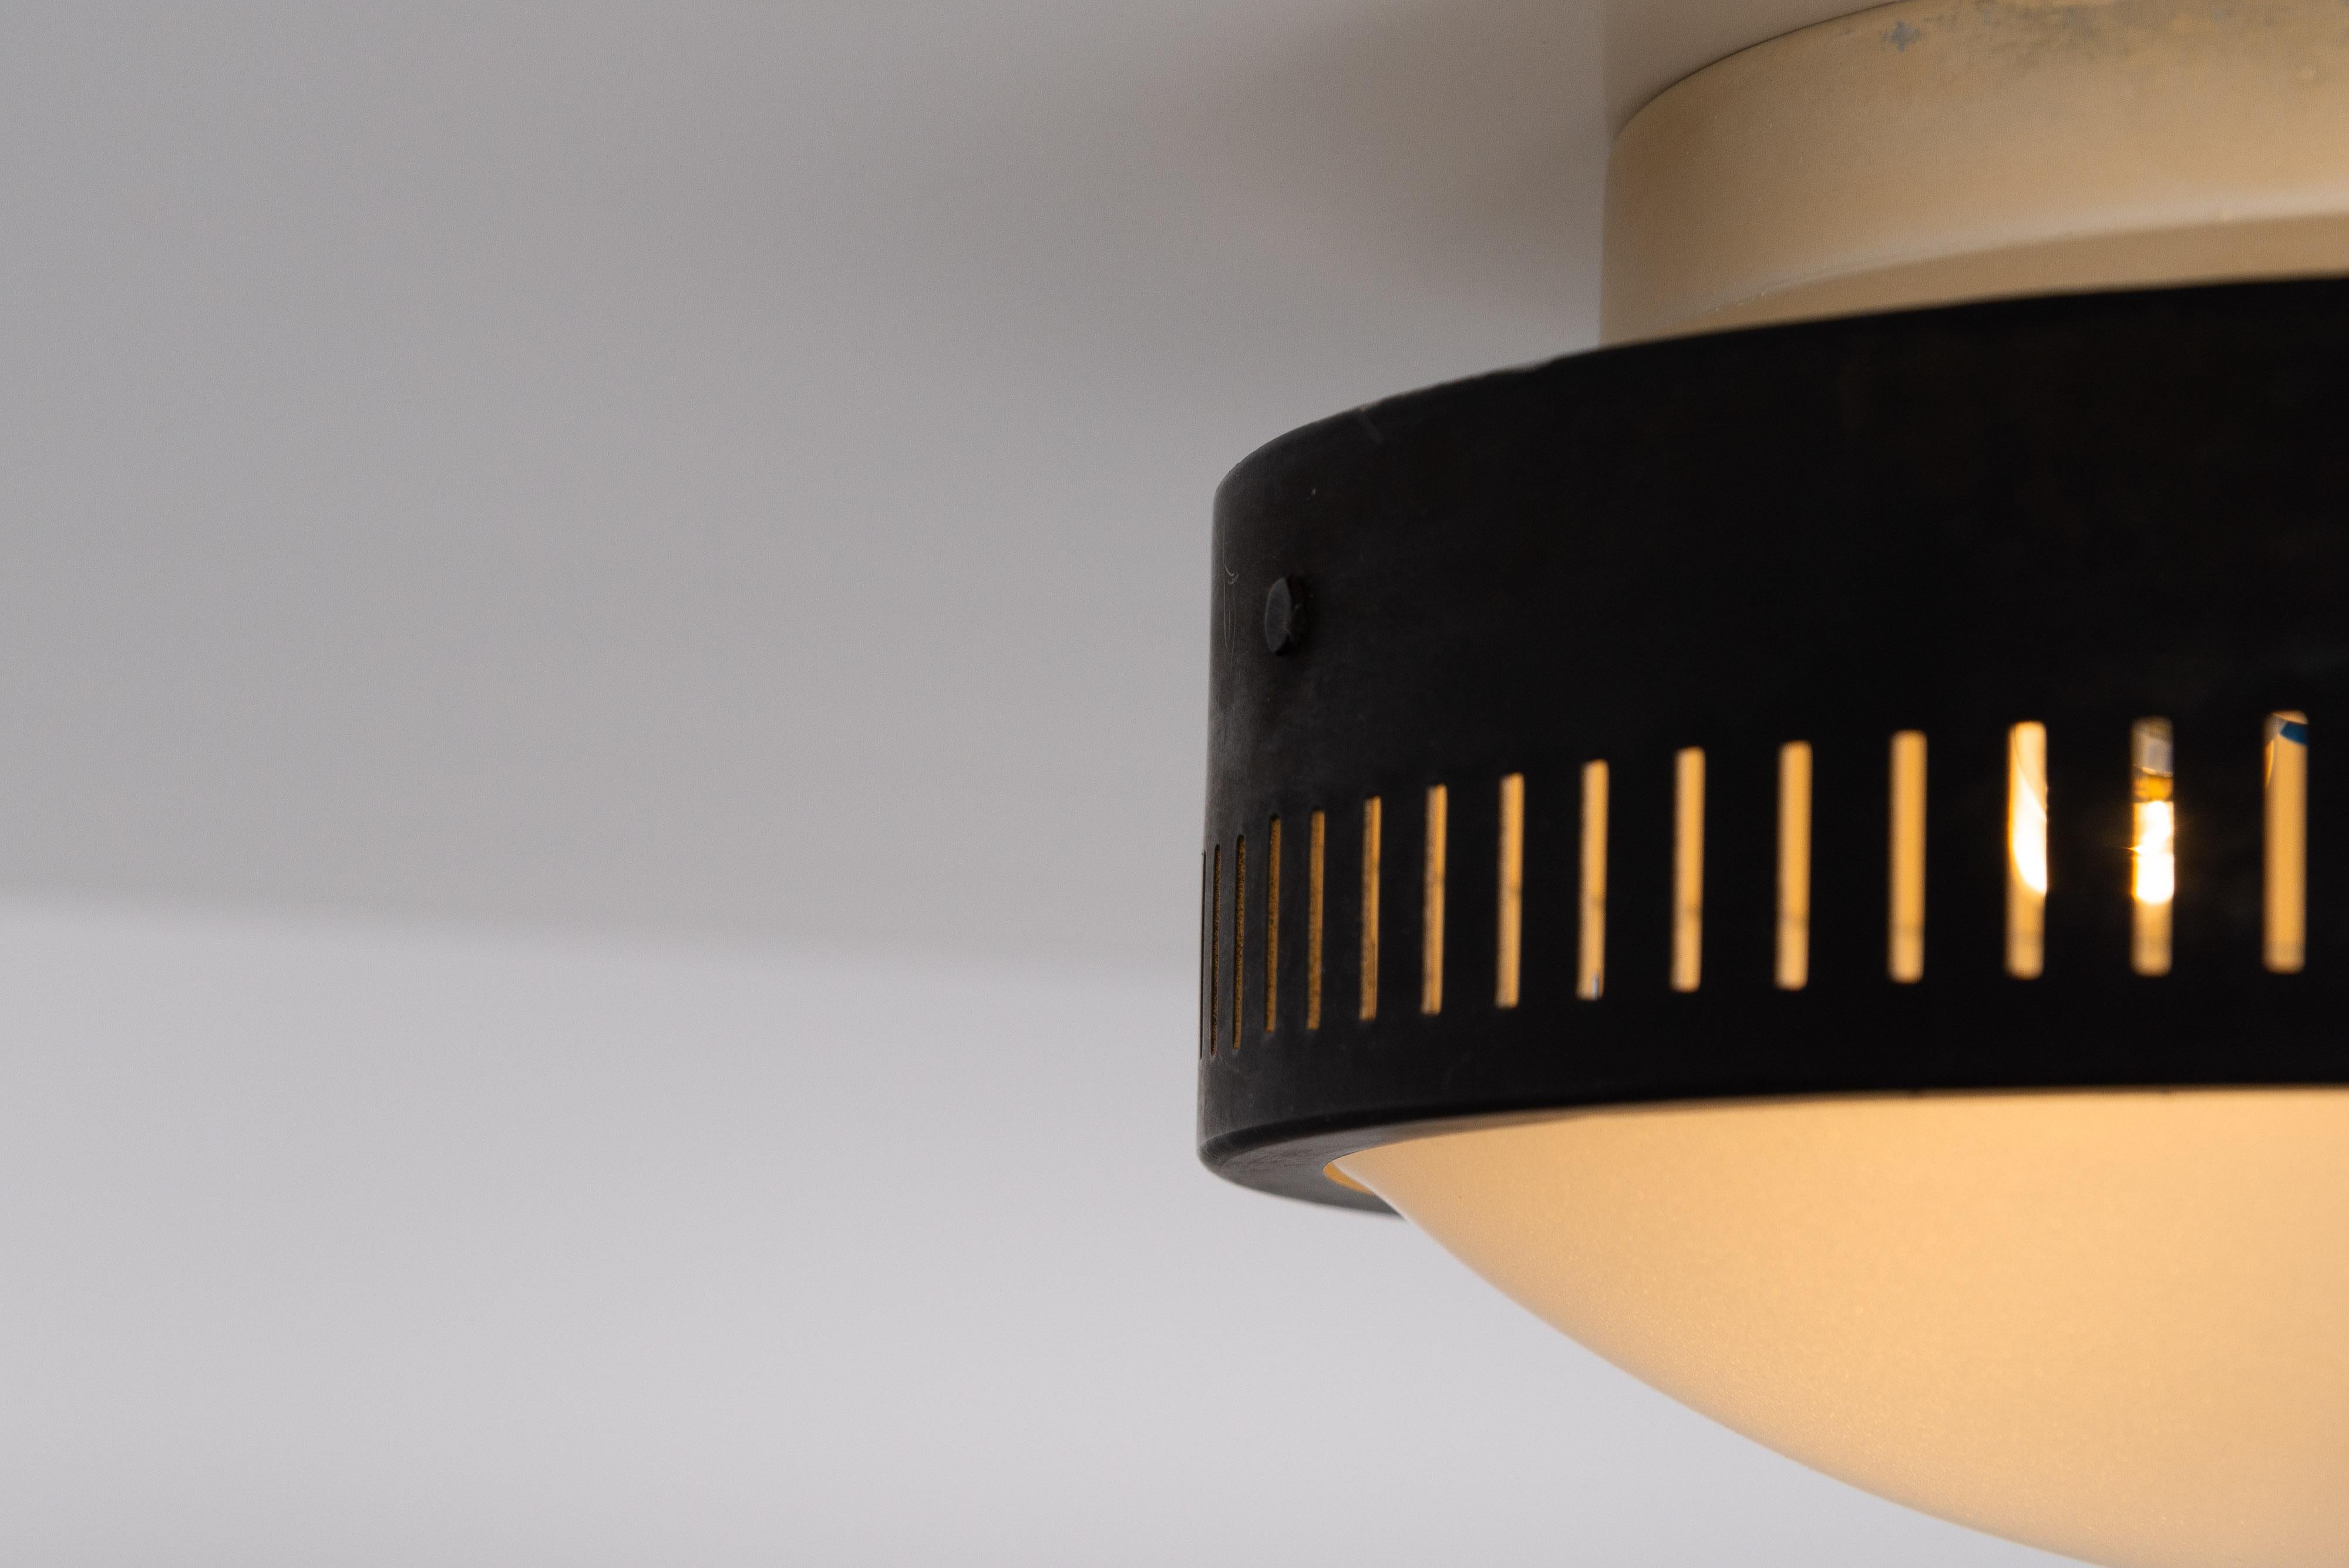 Minimalistic black ceiling lamps designed by Stilnovo and manufactured in Italy in 1960. An interesting feature are the die-cut diffuser patterns along the rim, which creates a beautiful light effect. Each lamp has the Stilnovo sticker on the